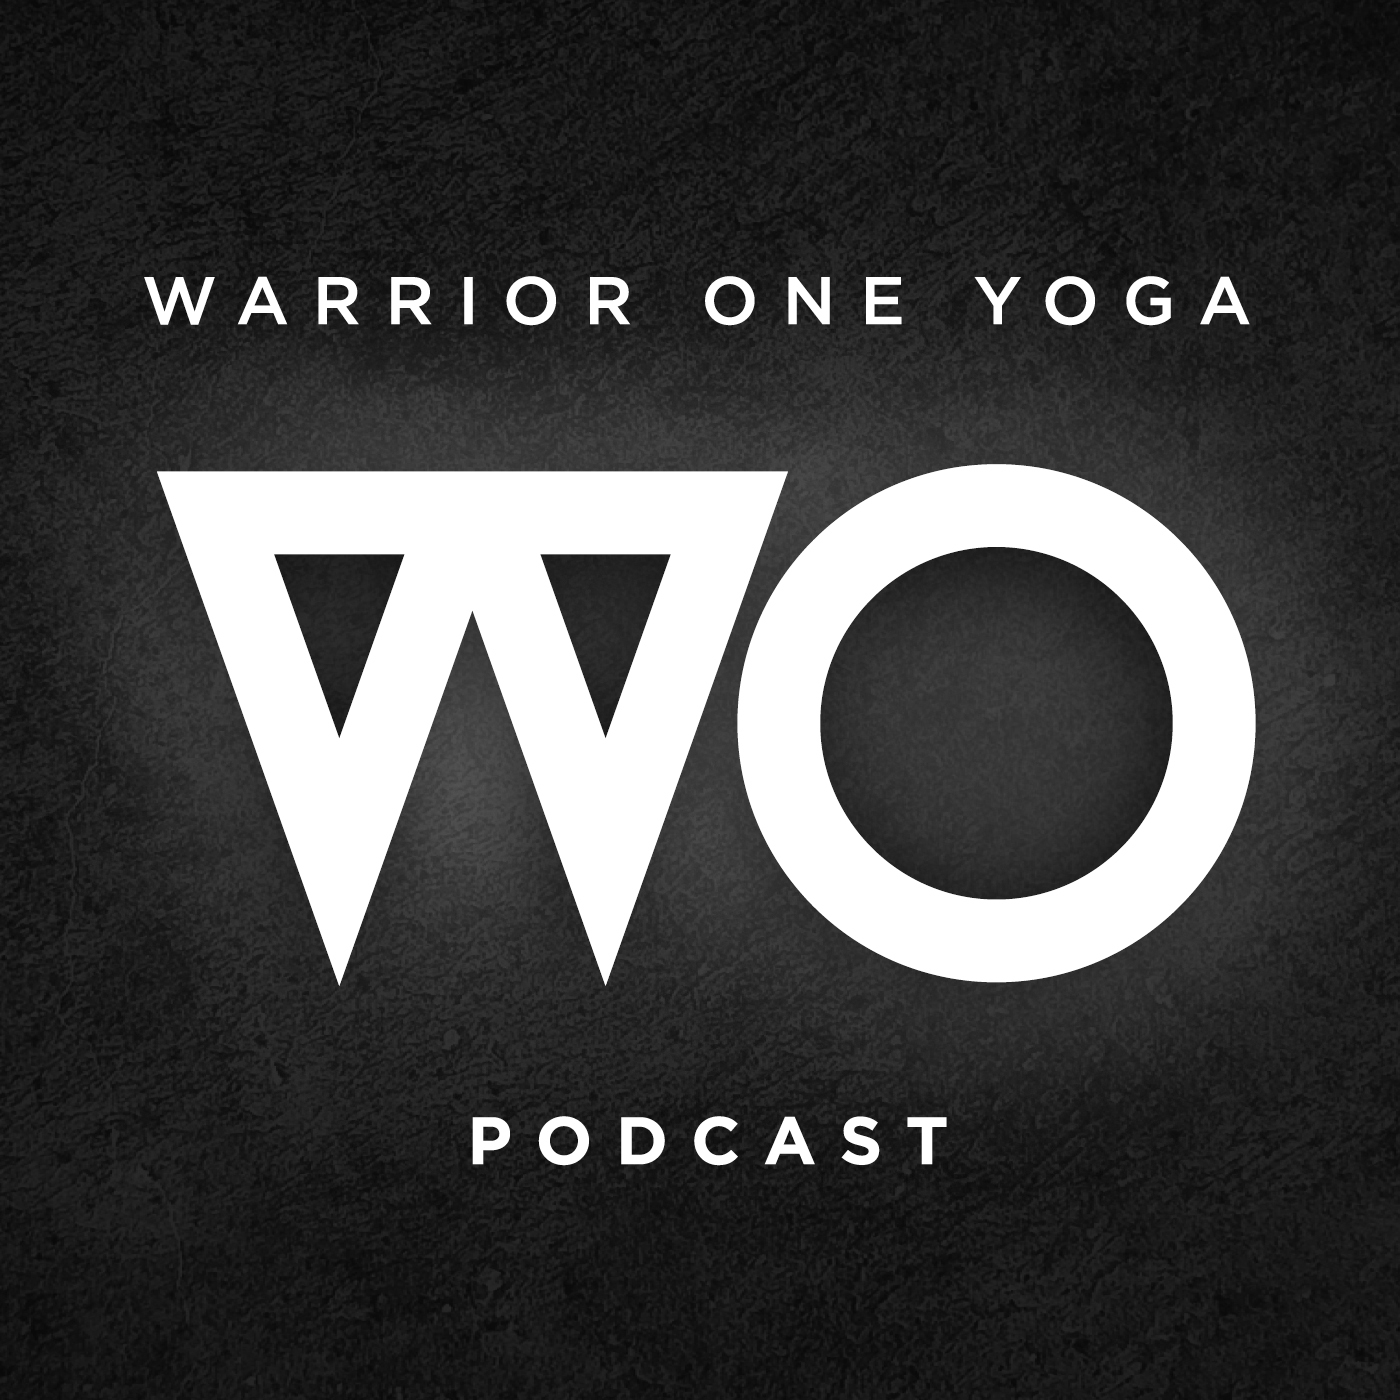 The story of Warrior One Yoga with Nova Rosaia and Dustin Brown: How did we get here?